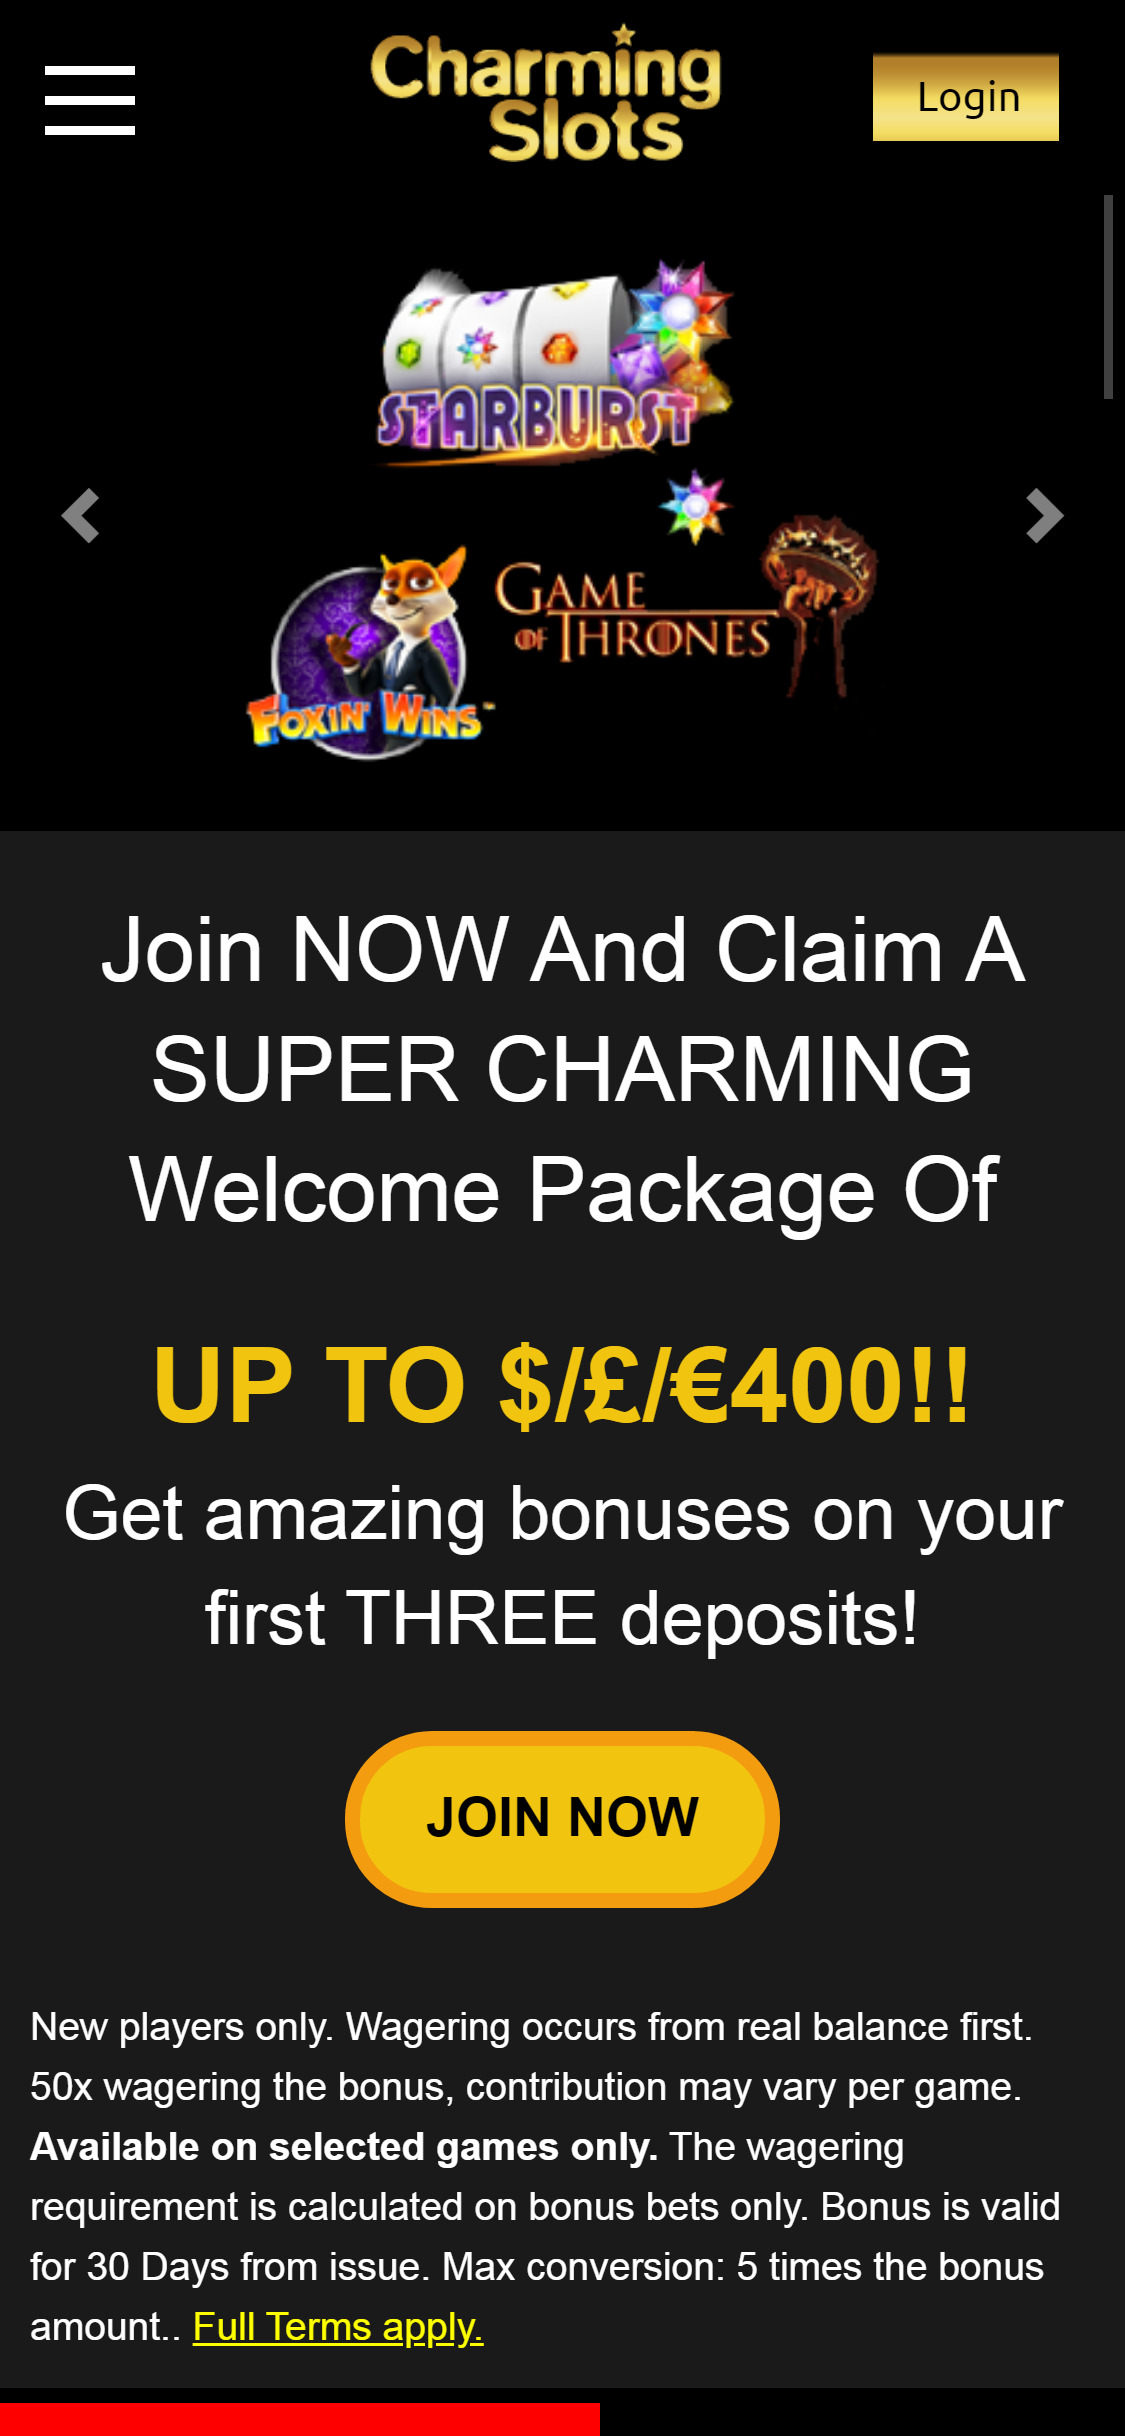 Charming Slots Casino Mobile Review